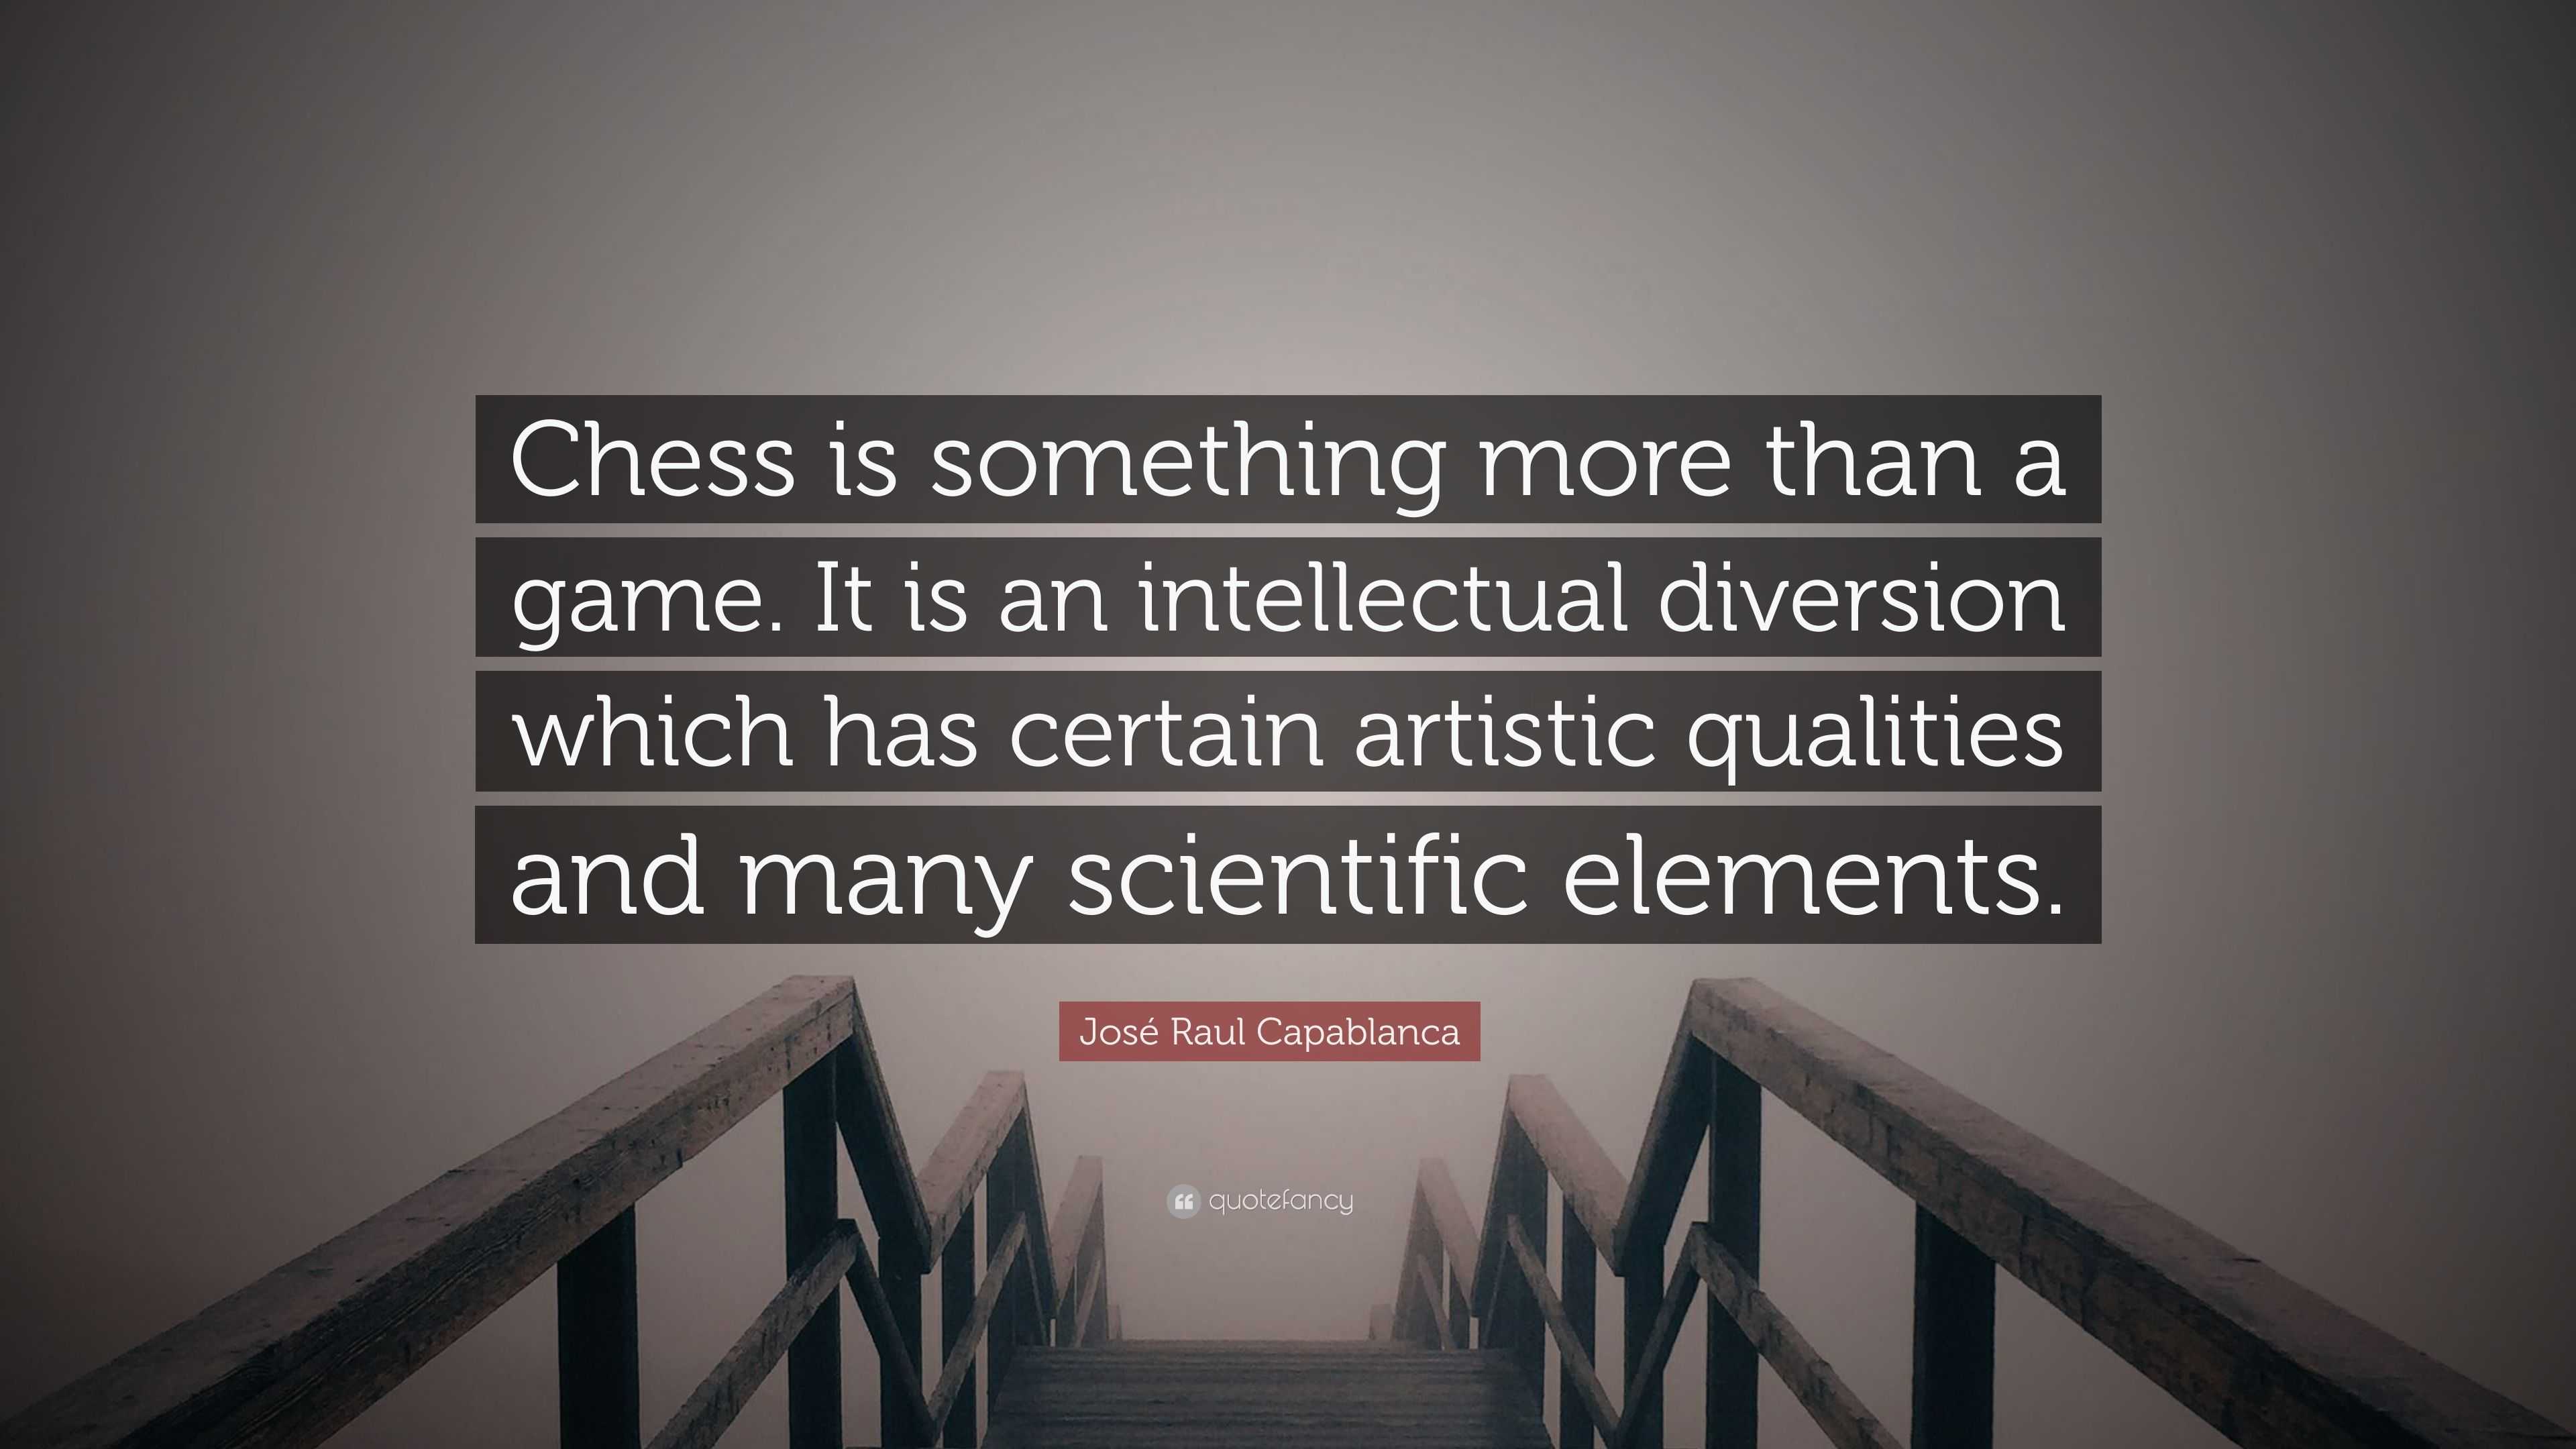 Chess Quotes - 27 quotes on Chess Science Quotes - Dictionary of Science  Quotations and Scientist Quotes